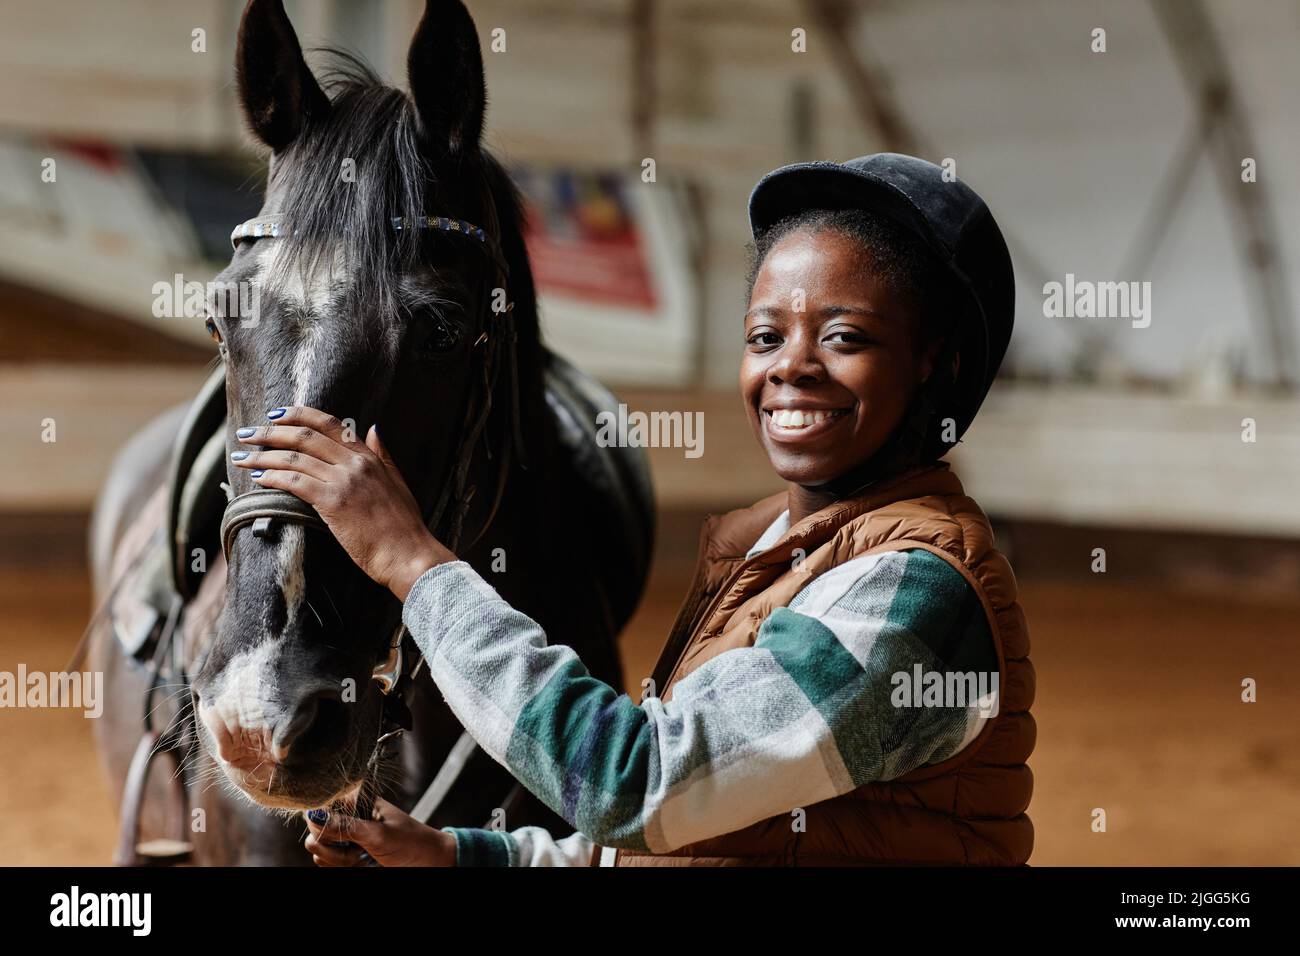 Waist up portrait of smiling black woman posing with horse in indoor riding arena and looking at camera, copy space Stock Photo